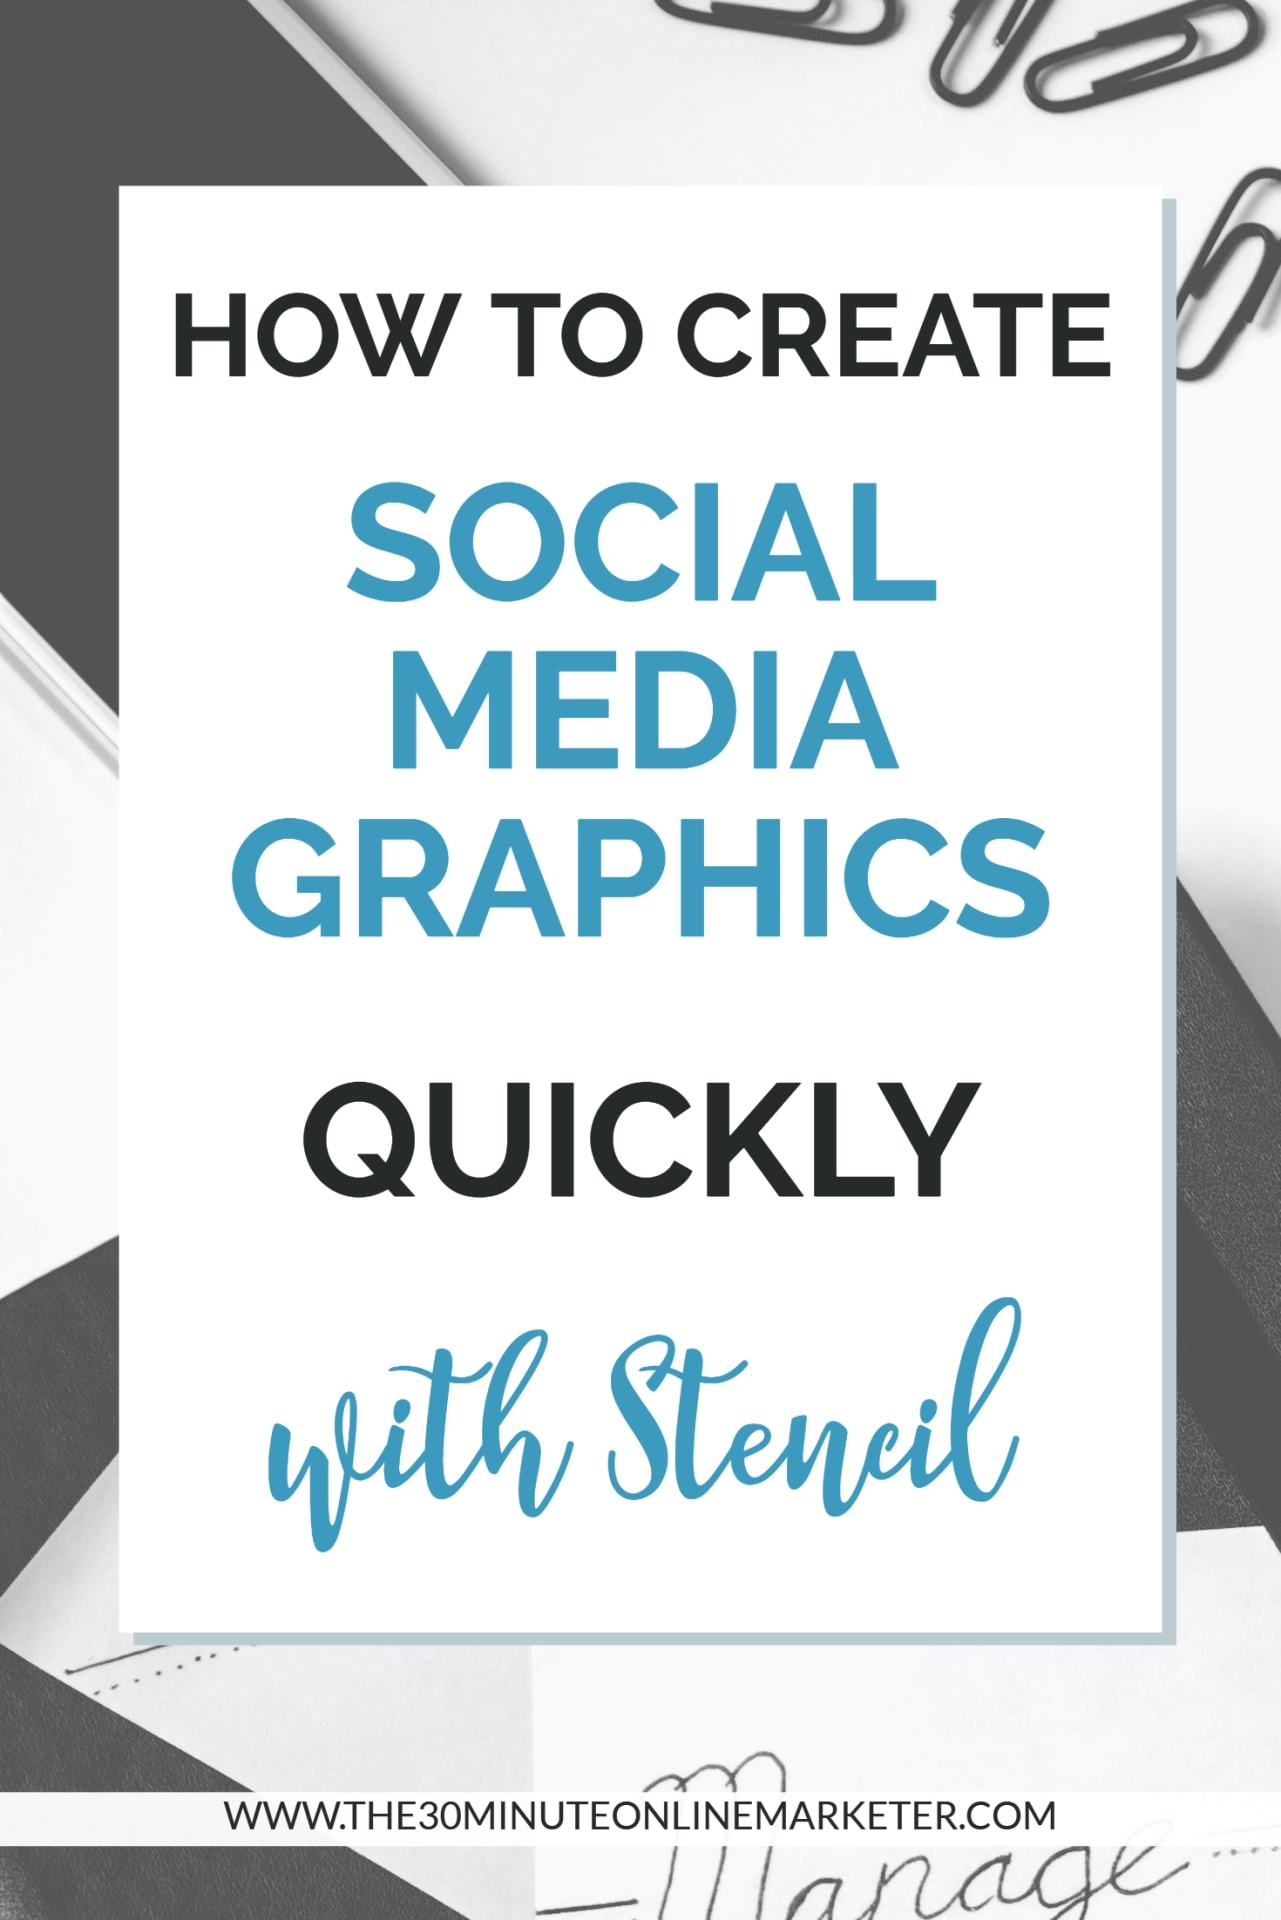 How to create social media graphics quickly with stencil